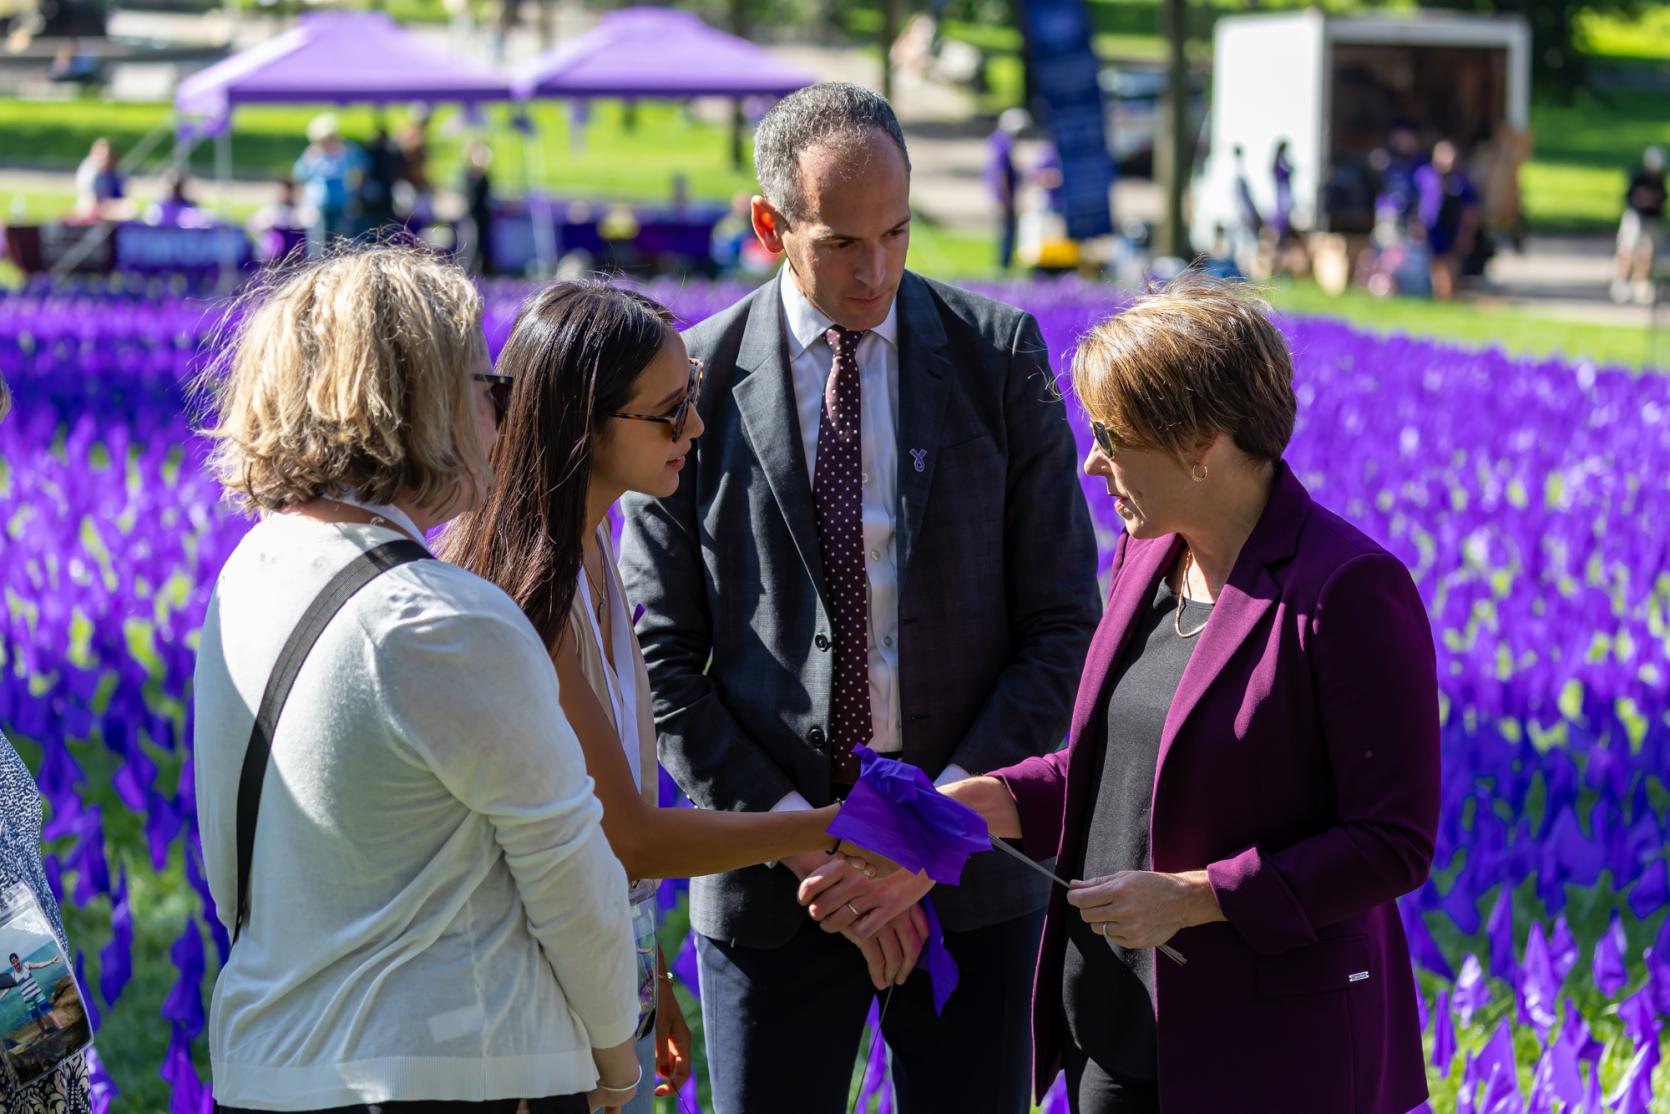 Governor Maura T. Healey and Department of Public Health Commissioner Robbie Goldstein, MD, PhD speak with Kar-Kate Parenteau and Cindy Kucich who lost their husband and brother, respectively, to overdose.